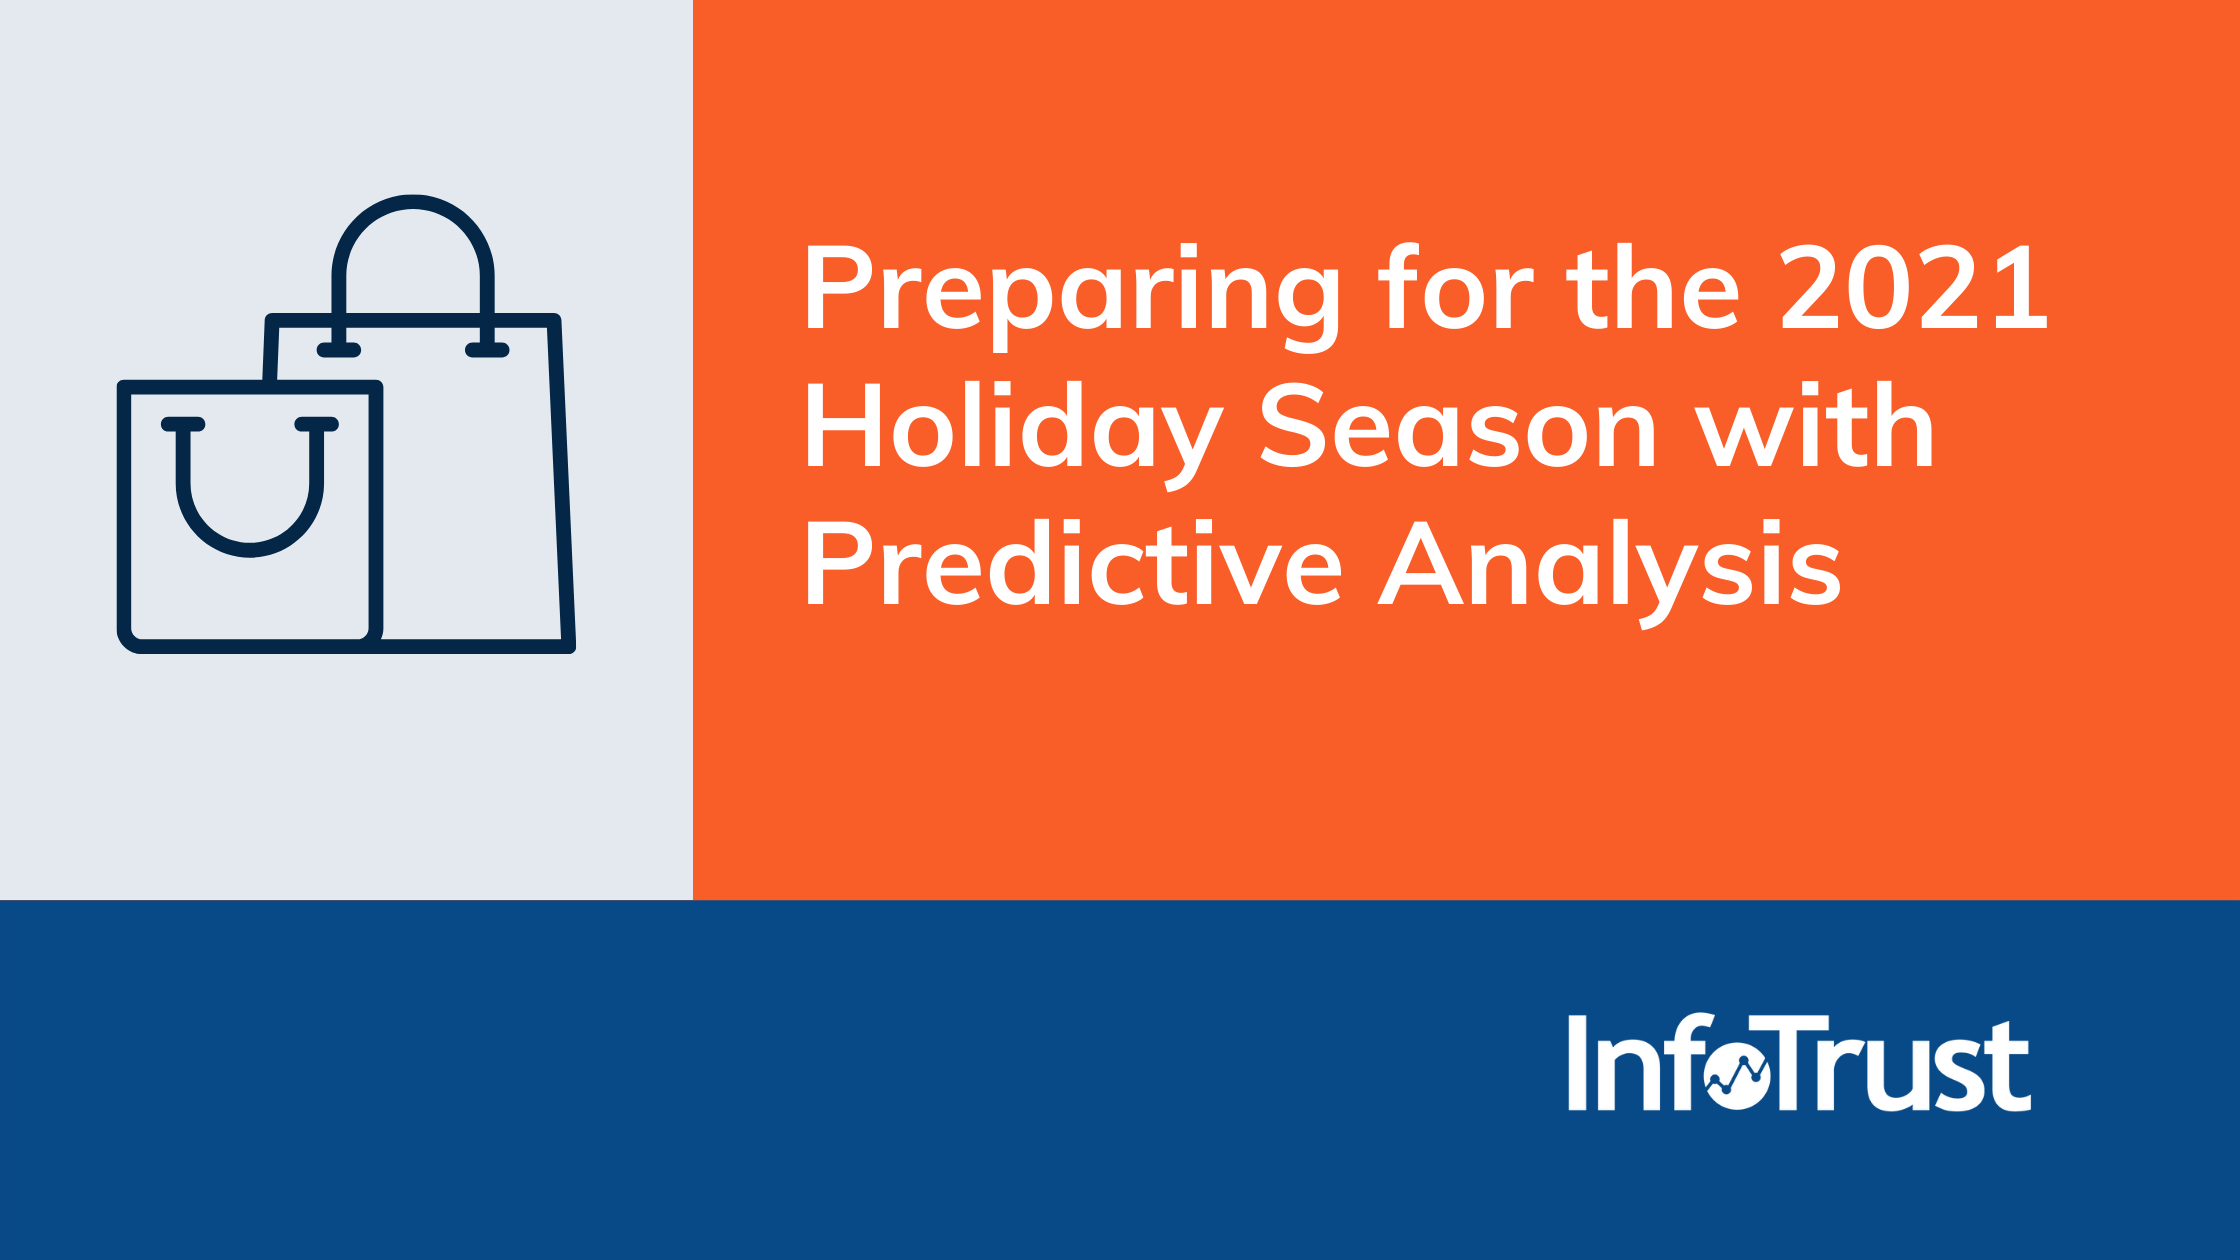 Preparing for the 2021 Holiday Season with Predictive Analysis